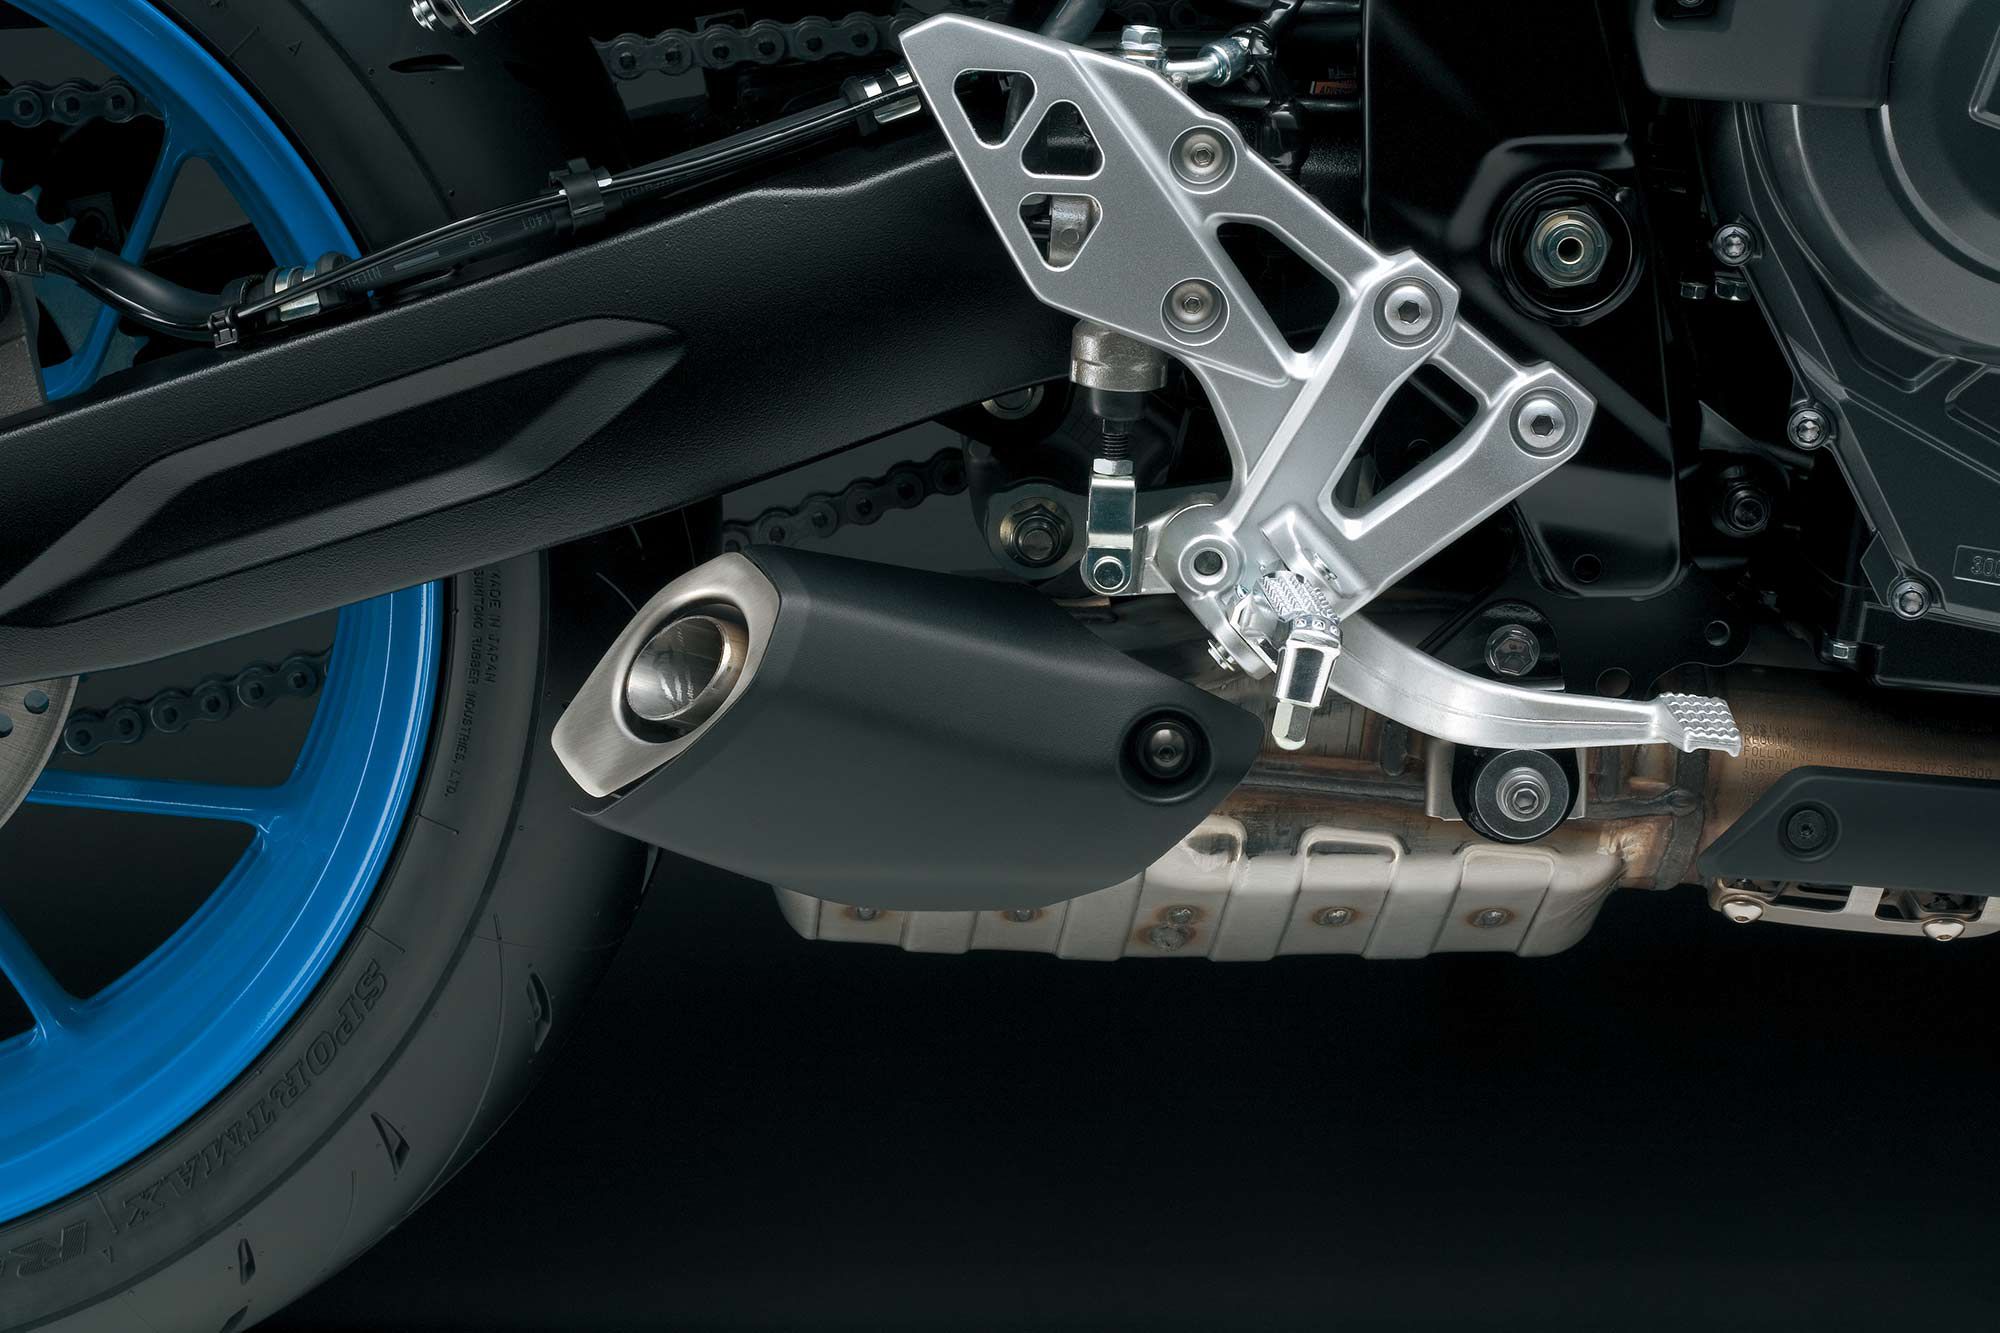 Distinctive short muffler is used, with an exhaust note that’s intended to bring some personality to the all-new parallel twin.